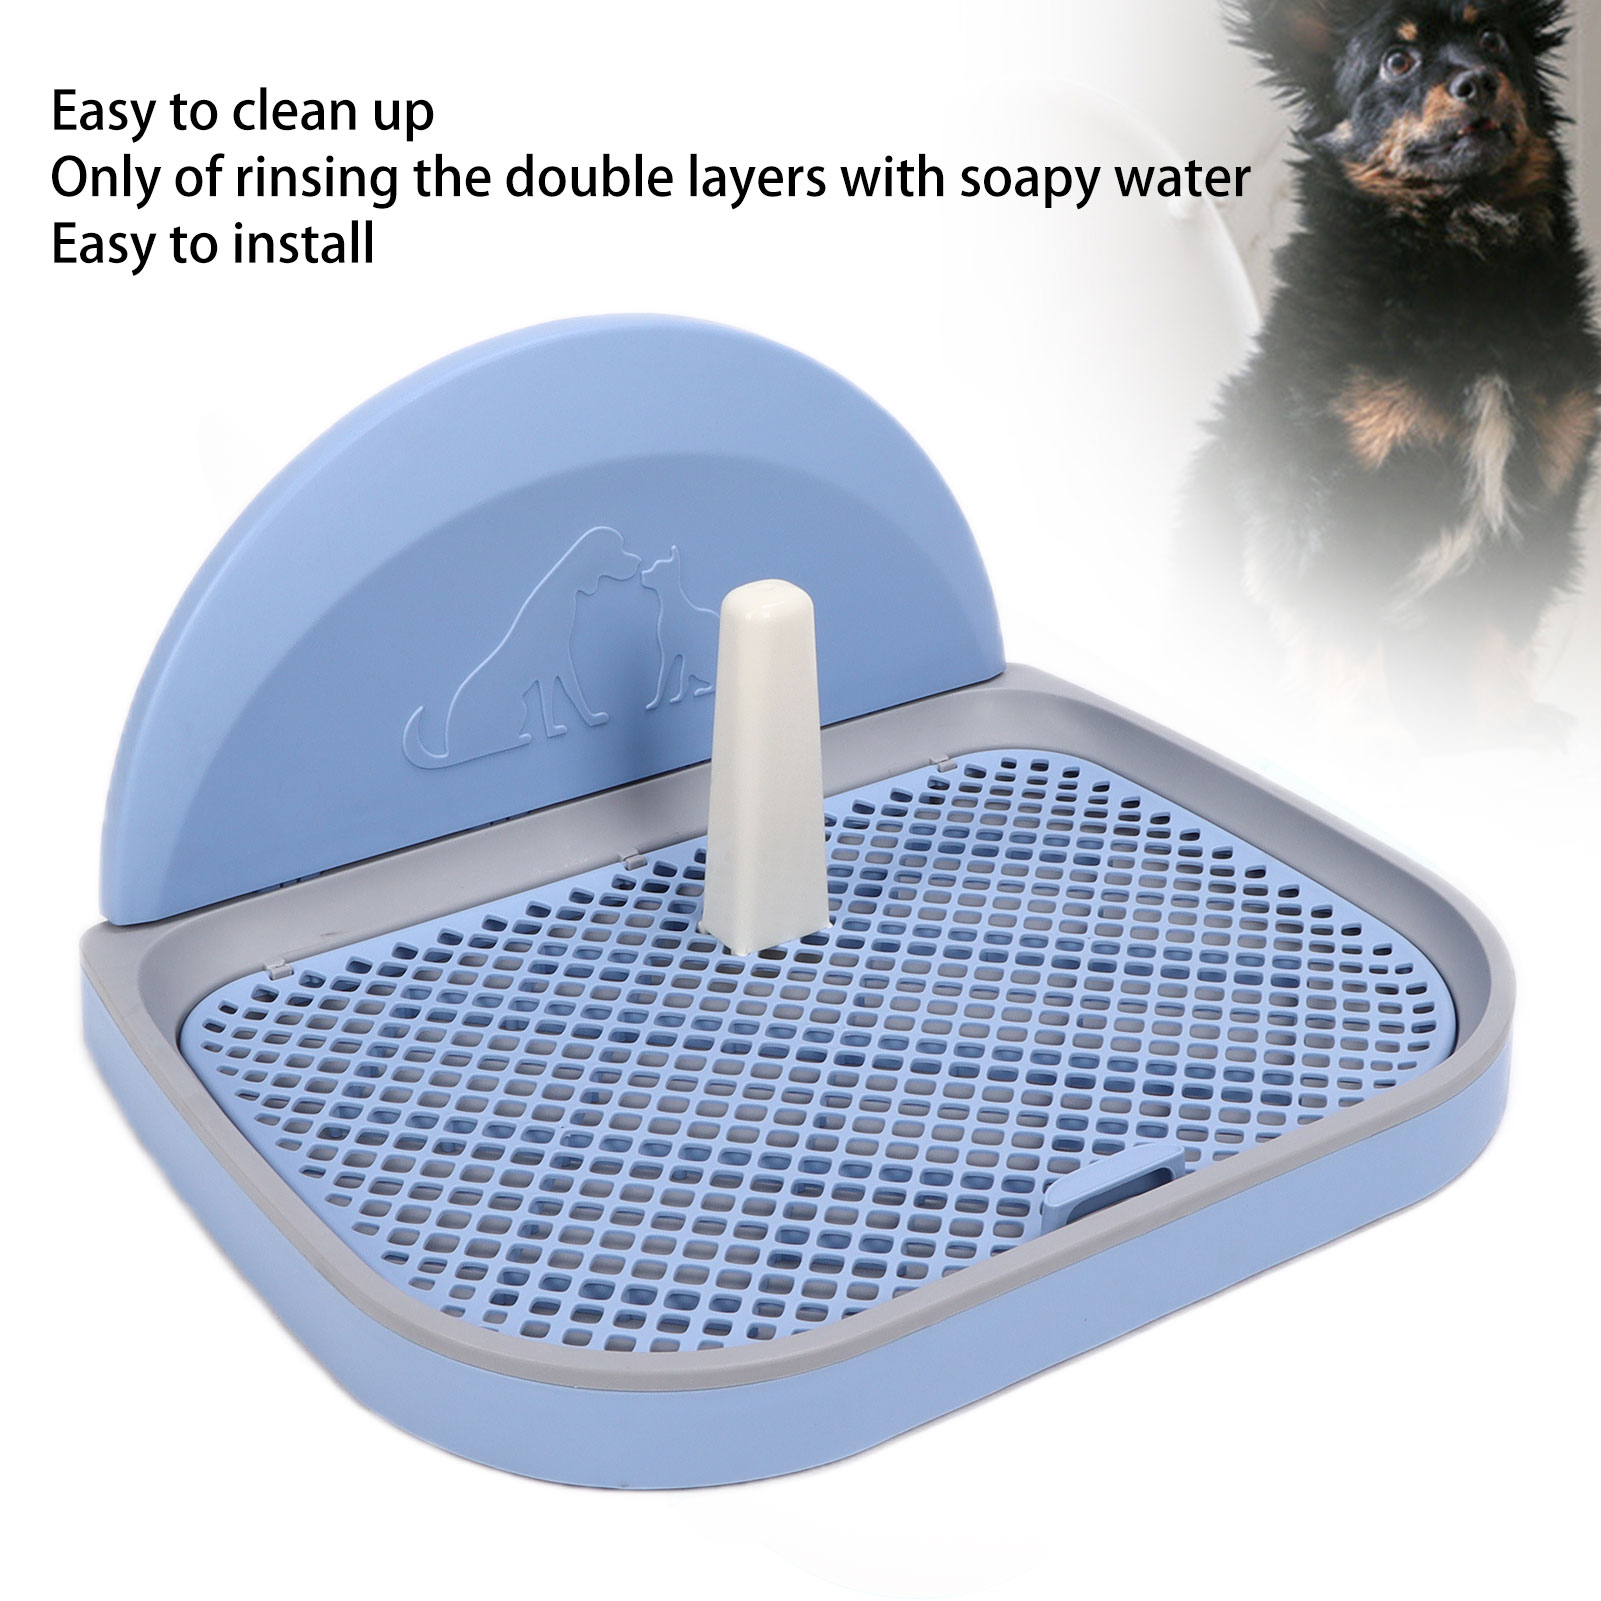 Mesh Pet Toilet Compact Pet Toilet for Dogs for Cats